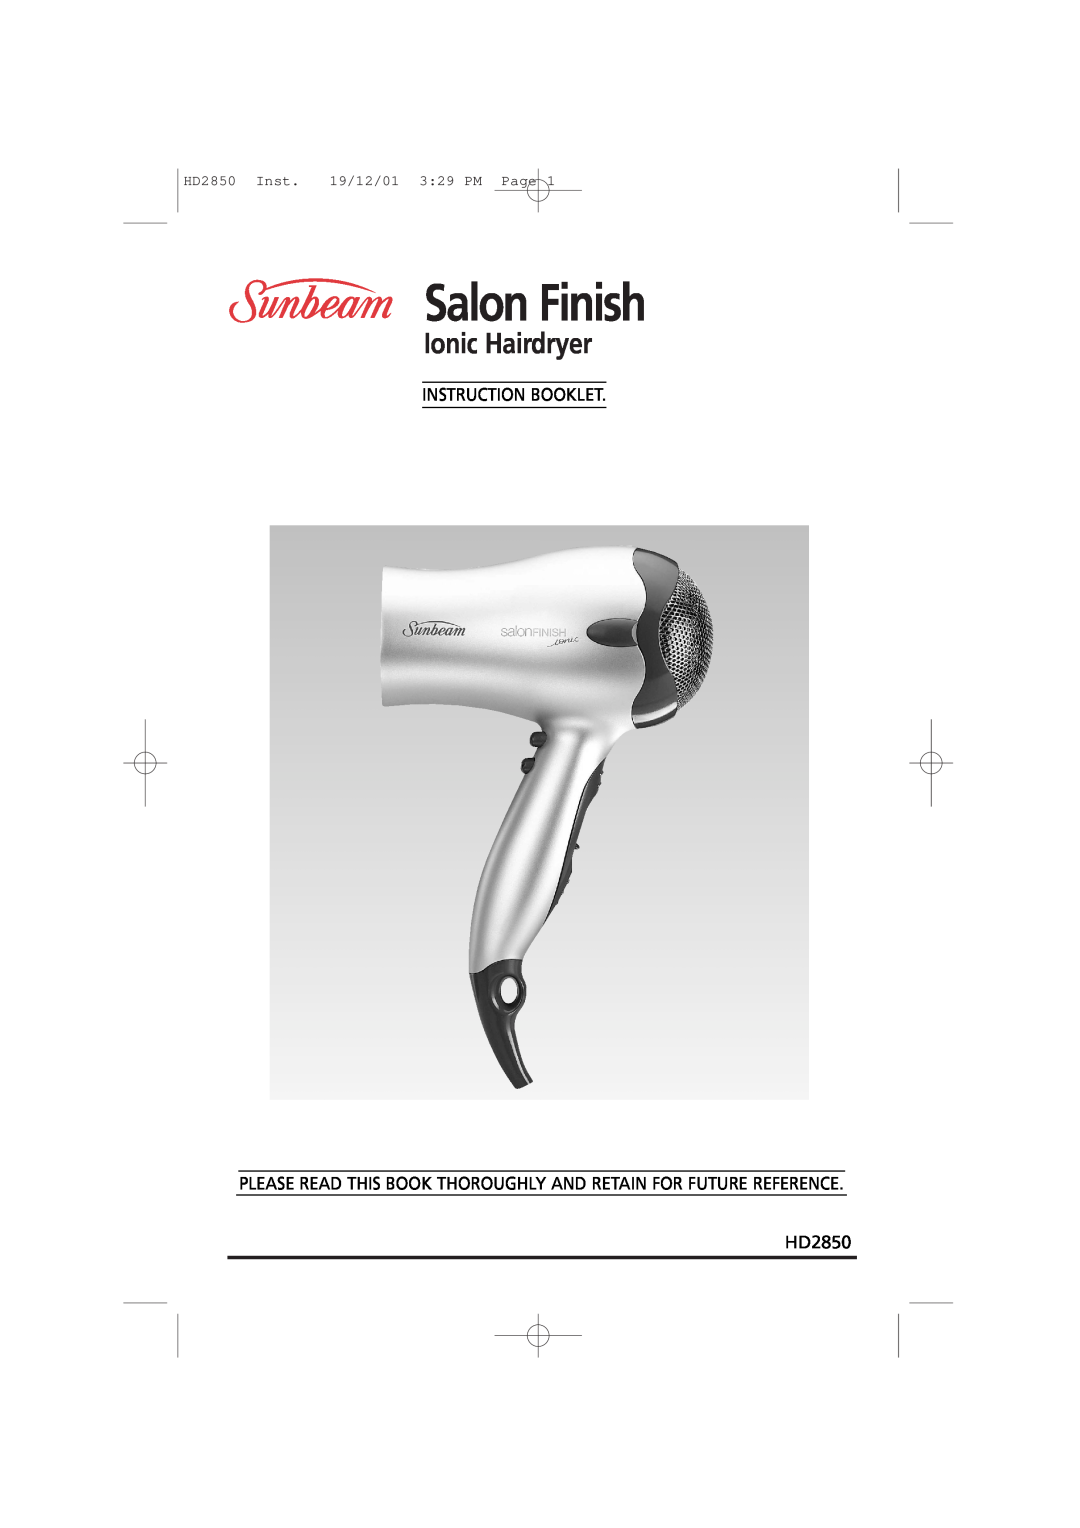 Sunbeam manual Salon Finish, Ionic Hairdryer, Instruction Booklet, HD2850 Inst. 19/12/01 329 PM Page 